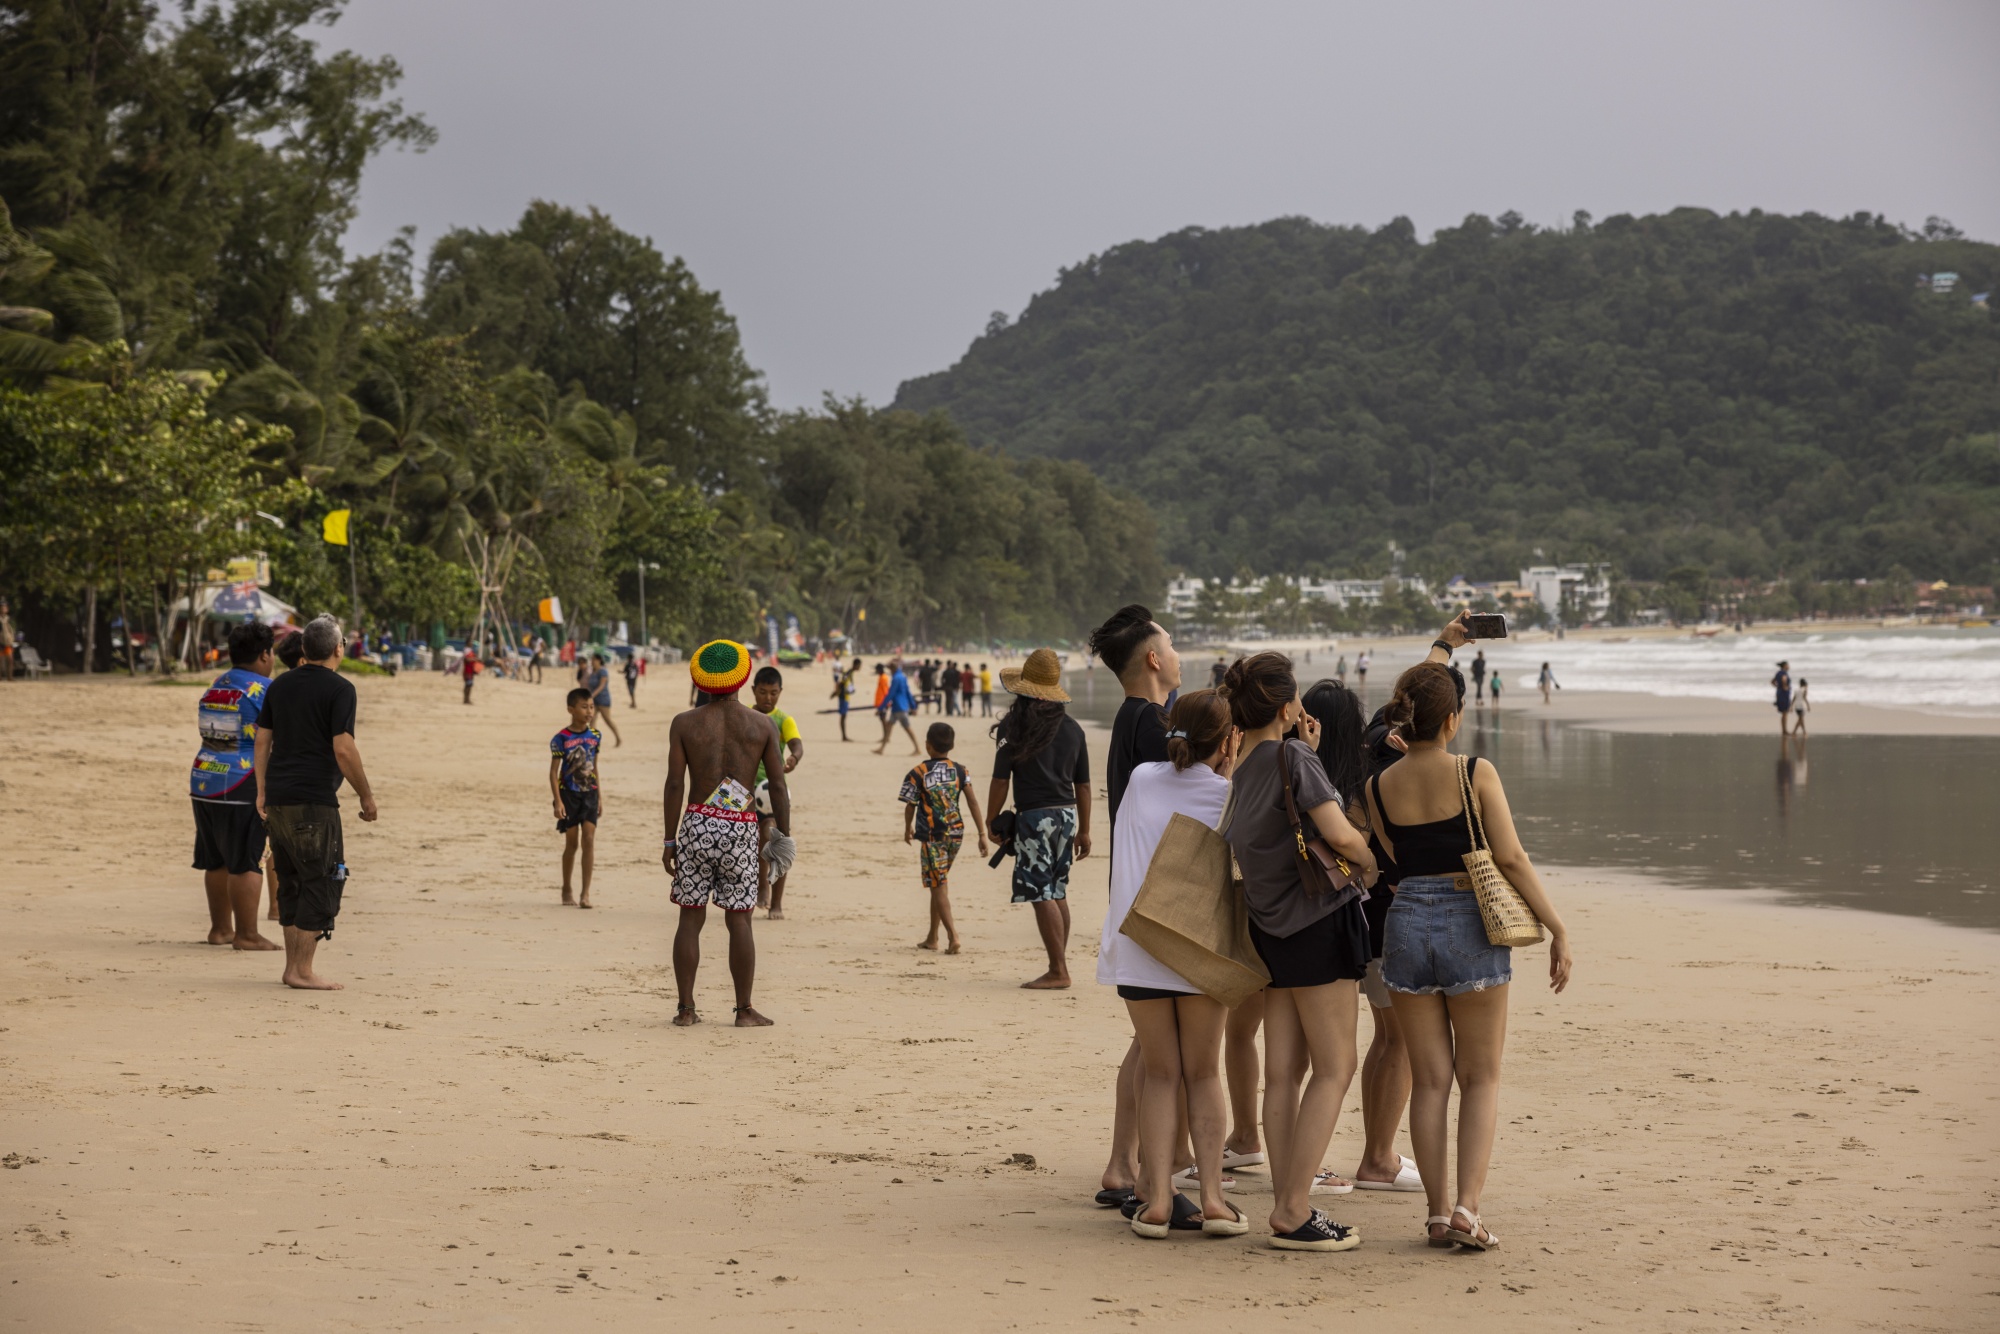 Tourists take a selfie photograph on Patong Beach in Phuket, Thailand.